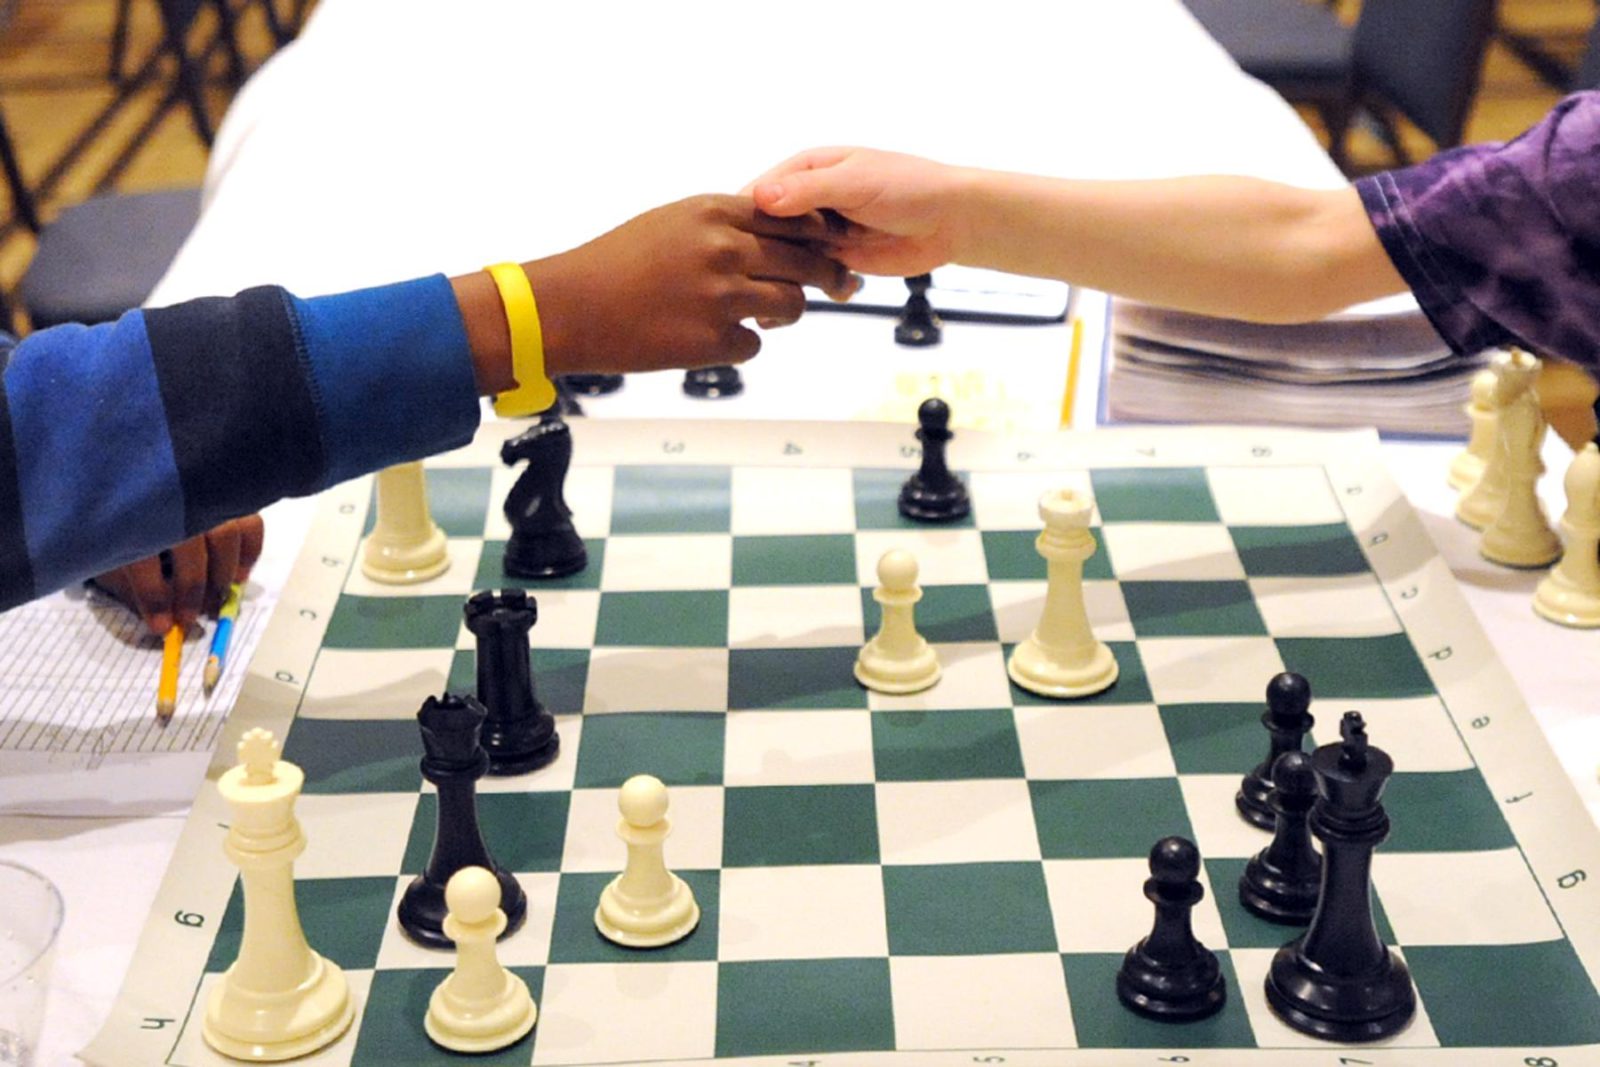 Promethean Partners With Chess Grandmaster to Launch School Chess Competition